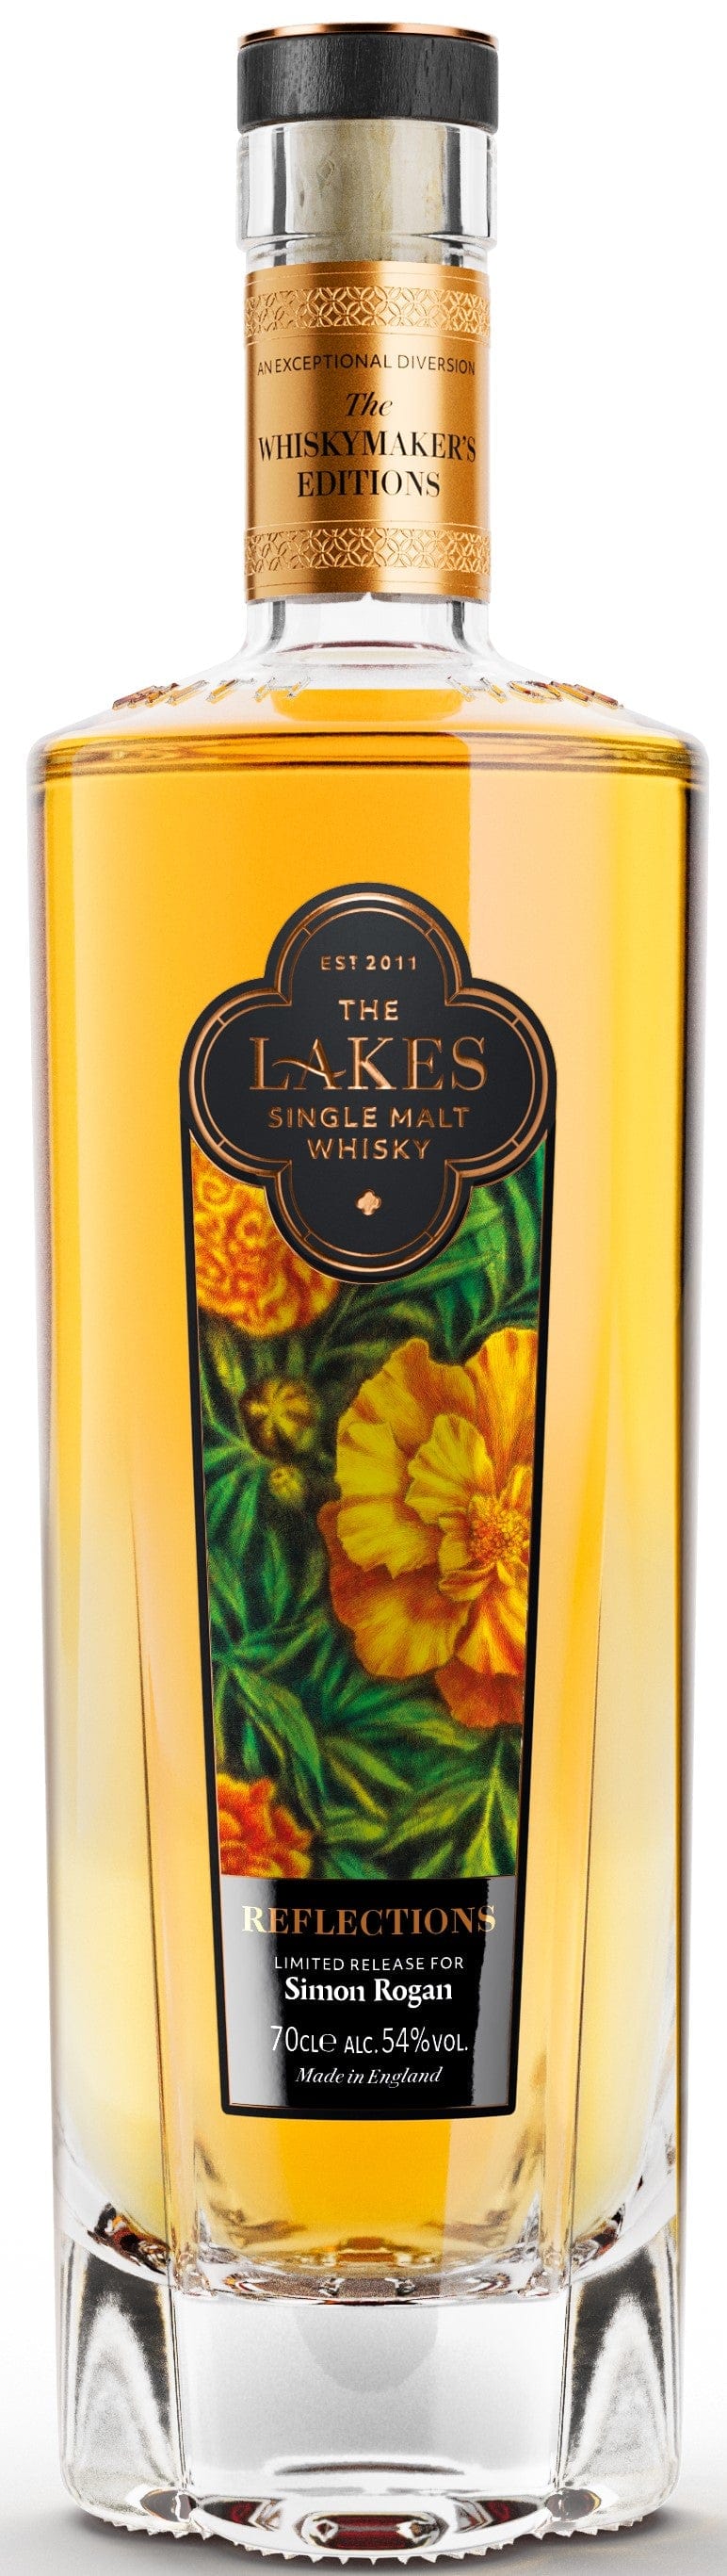 The Lakes Whiskymaker&